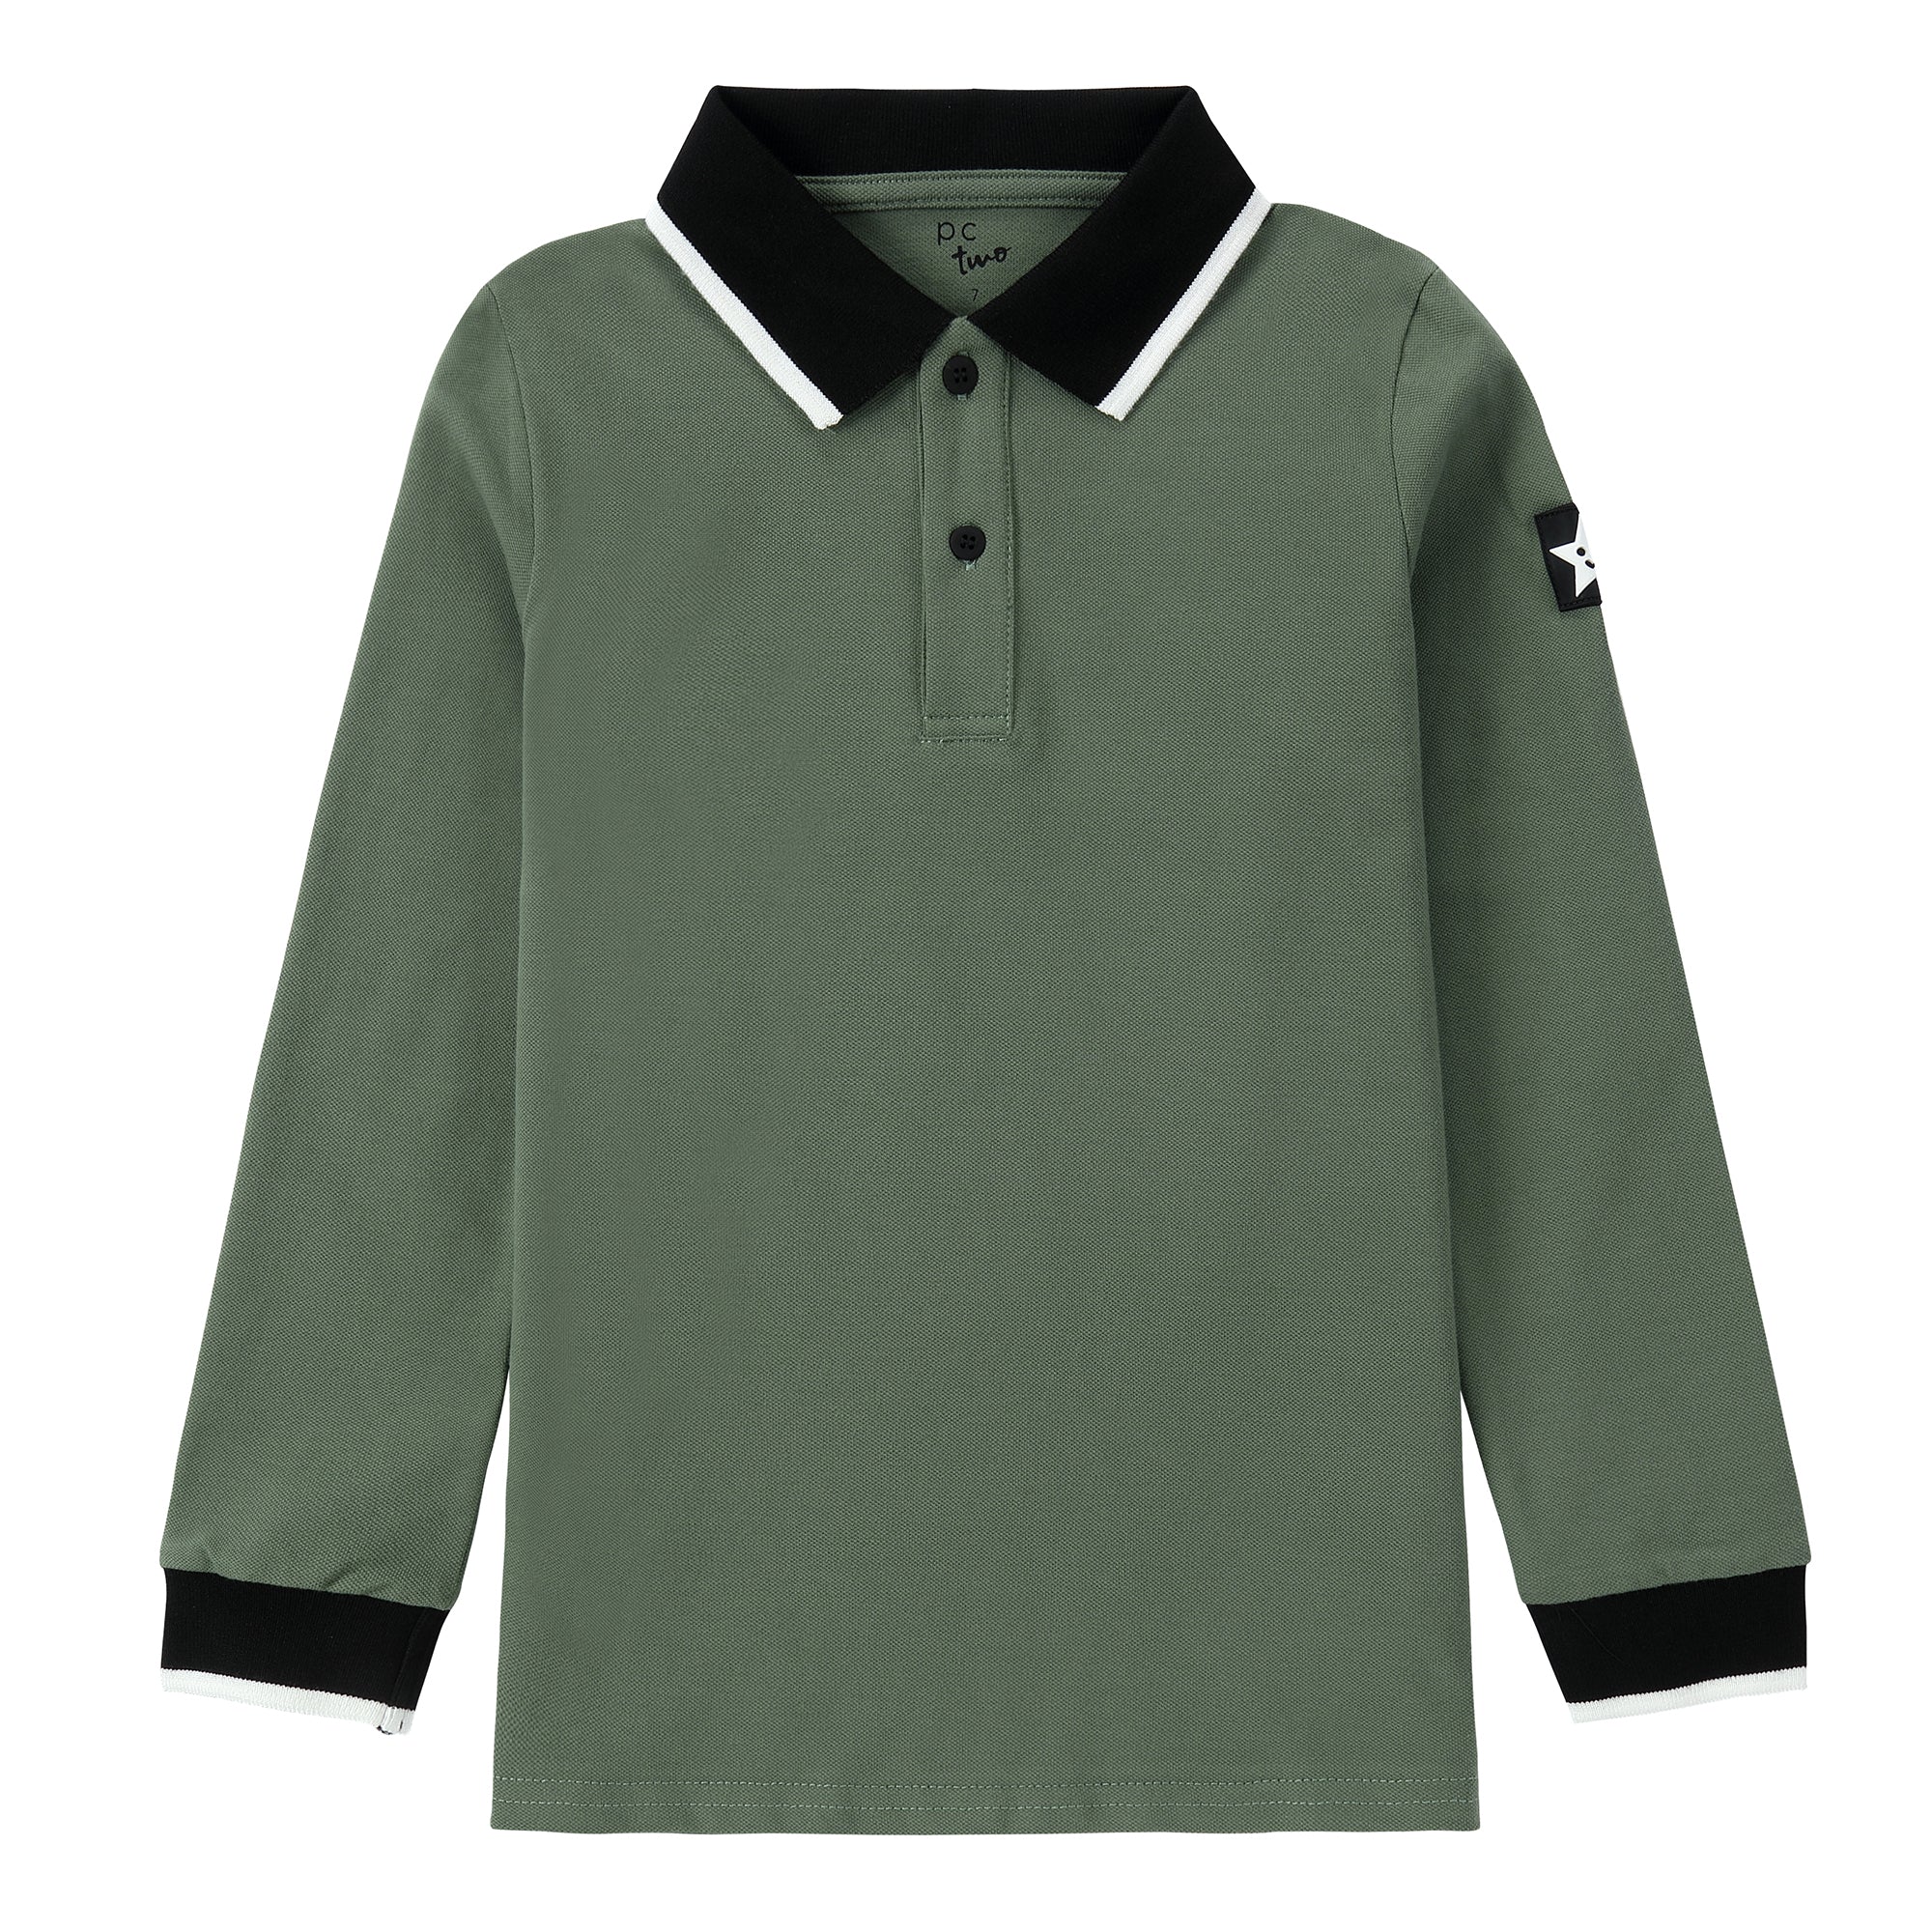 Sage Polo With Black and White Details